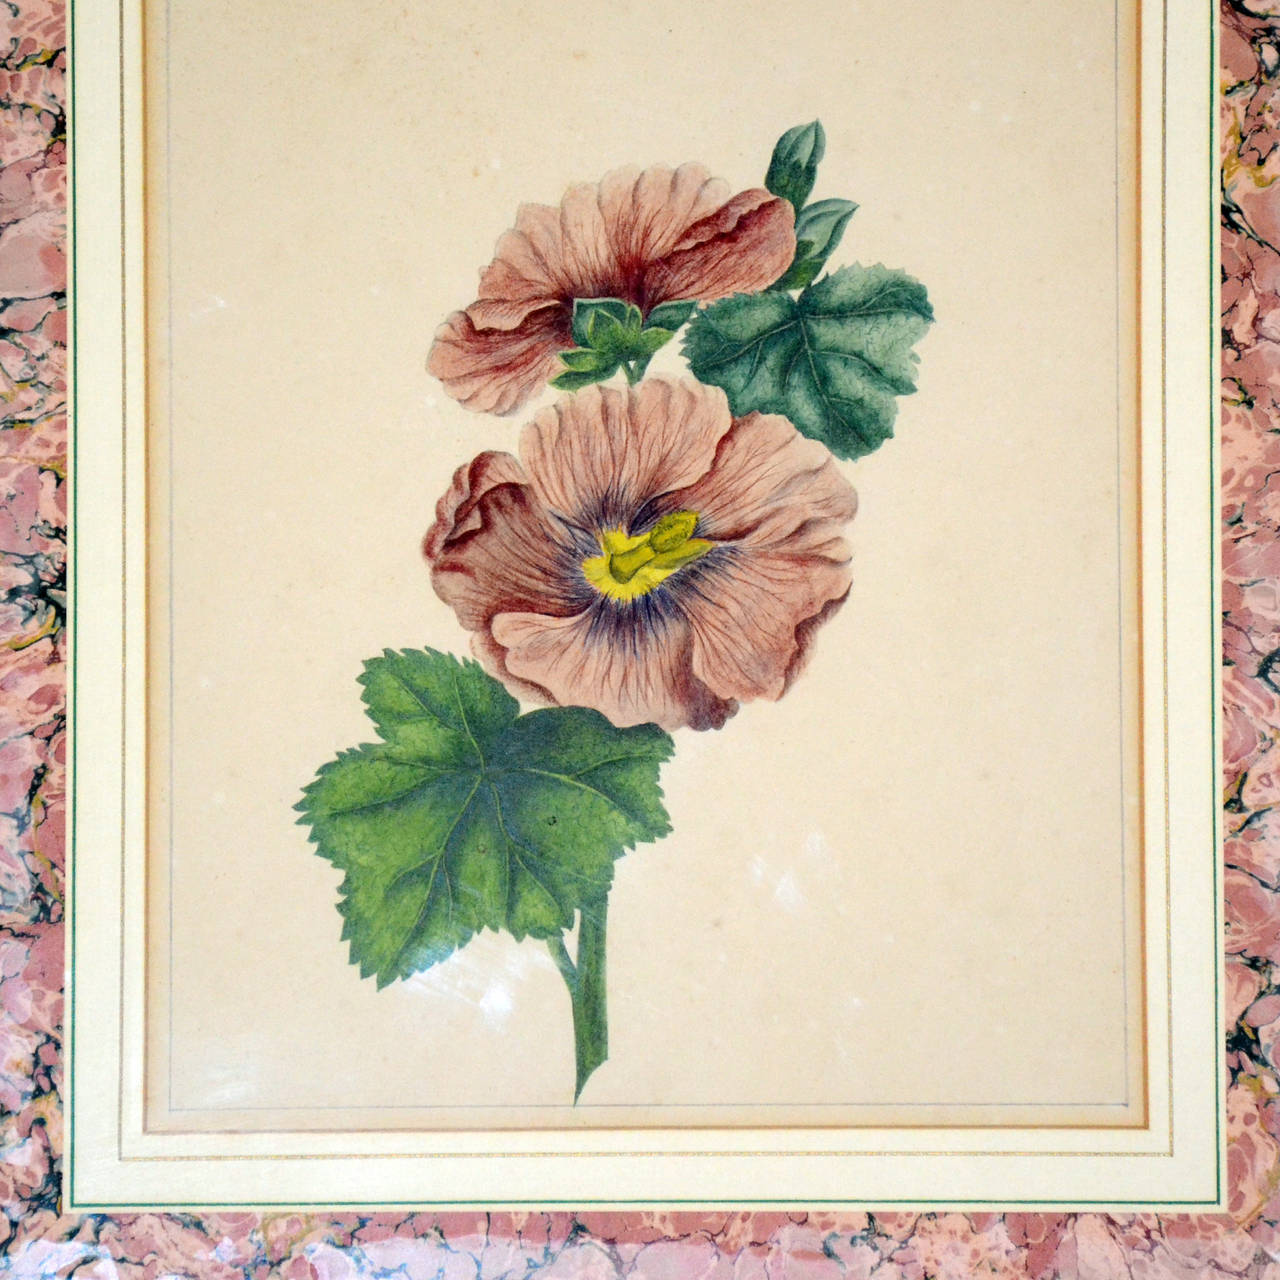 Exquisite group of five fruit and flower, beautifully framed watercolors on rag paper. All are beautifully framed with lined and marbleized mats in fine frames under glass. I date these to the mid nineteenth century. One was un-framed and fully